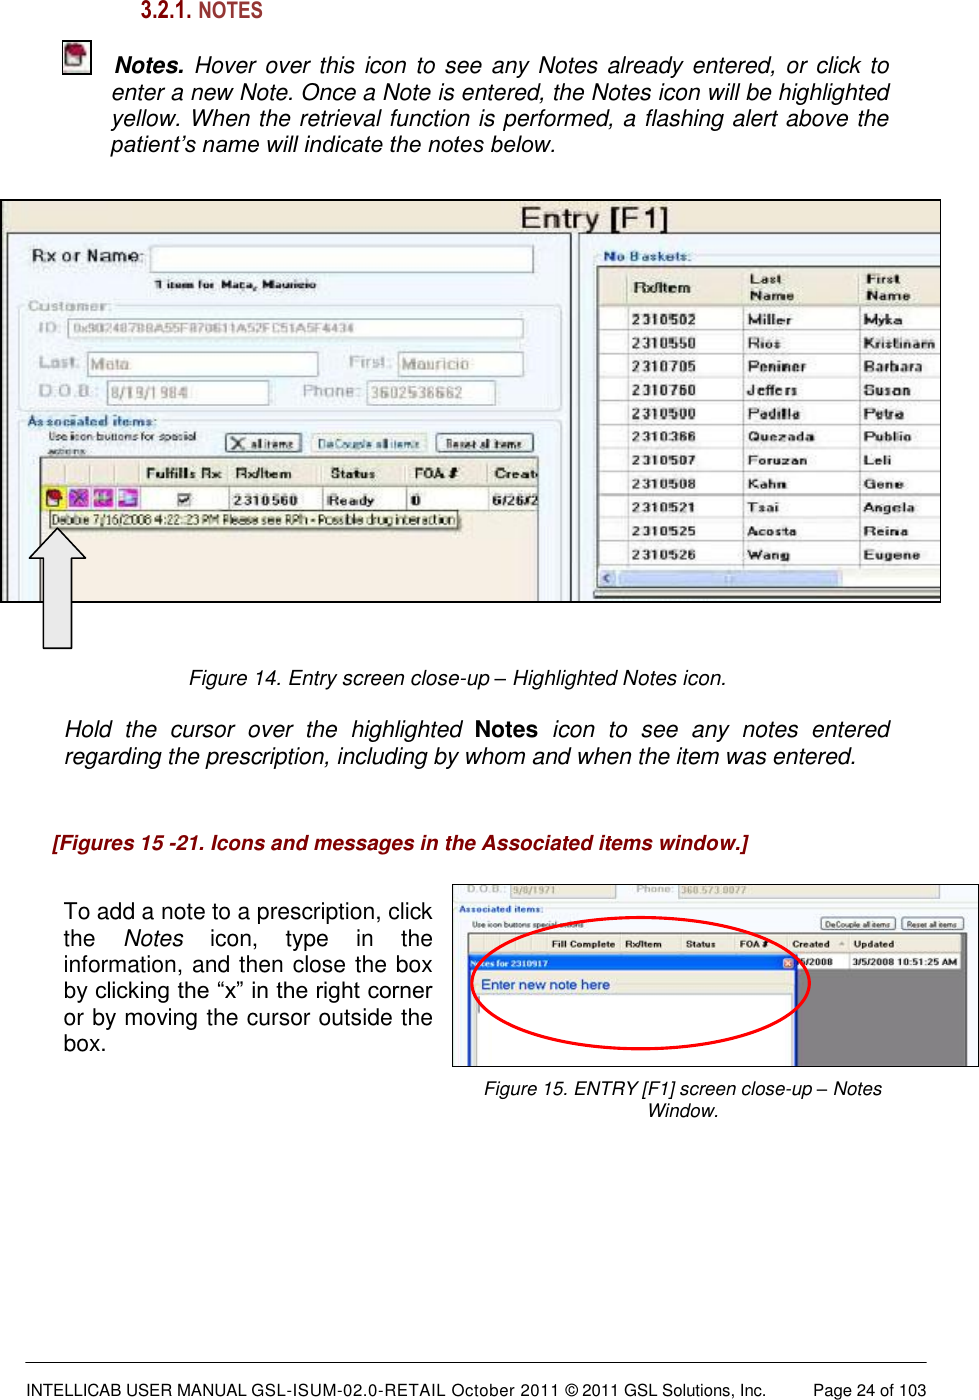  INTELLICAB USER MANUAL GSL-ISUM-02.0-RETAIL October 2011 © 2011 GSL Solutions, Inc.   Page 24 of 103   [Figures 15 -21. Icons and messages in the Associated items window.] 3.2.1.  NOTES  Notes. Hover over this icon to see any Notes already entered, or click to enter a new Note. Once a Note is entered, the Notes icon will be highlighted yellow. When the retrieval function is performed, a flashing alert above the patient’s name will indicate the notes below.   Figure 14. Entry screen close-up – Highlighted Notes icon.  Hold  the  cursor  over  the  highlighted  Notes  icon  to  see  any  notes  entered regarding the prescription, including by whom and when the item was entered.      To add a note to a prescription, click the  Notes  icon,  type  in  the information, and then close the box by clicking the “x” in the right corner or by moving the cursor outside the box. Figure 15. ENTRY [F1] screen close-up – Notes Window.    